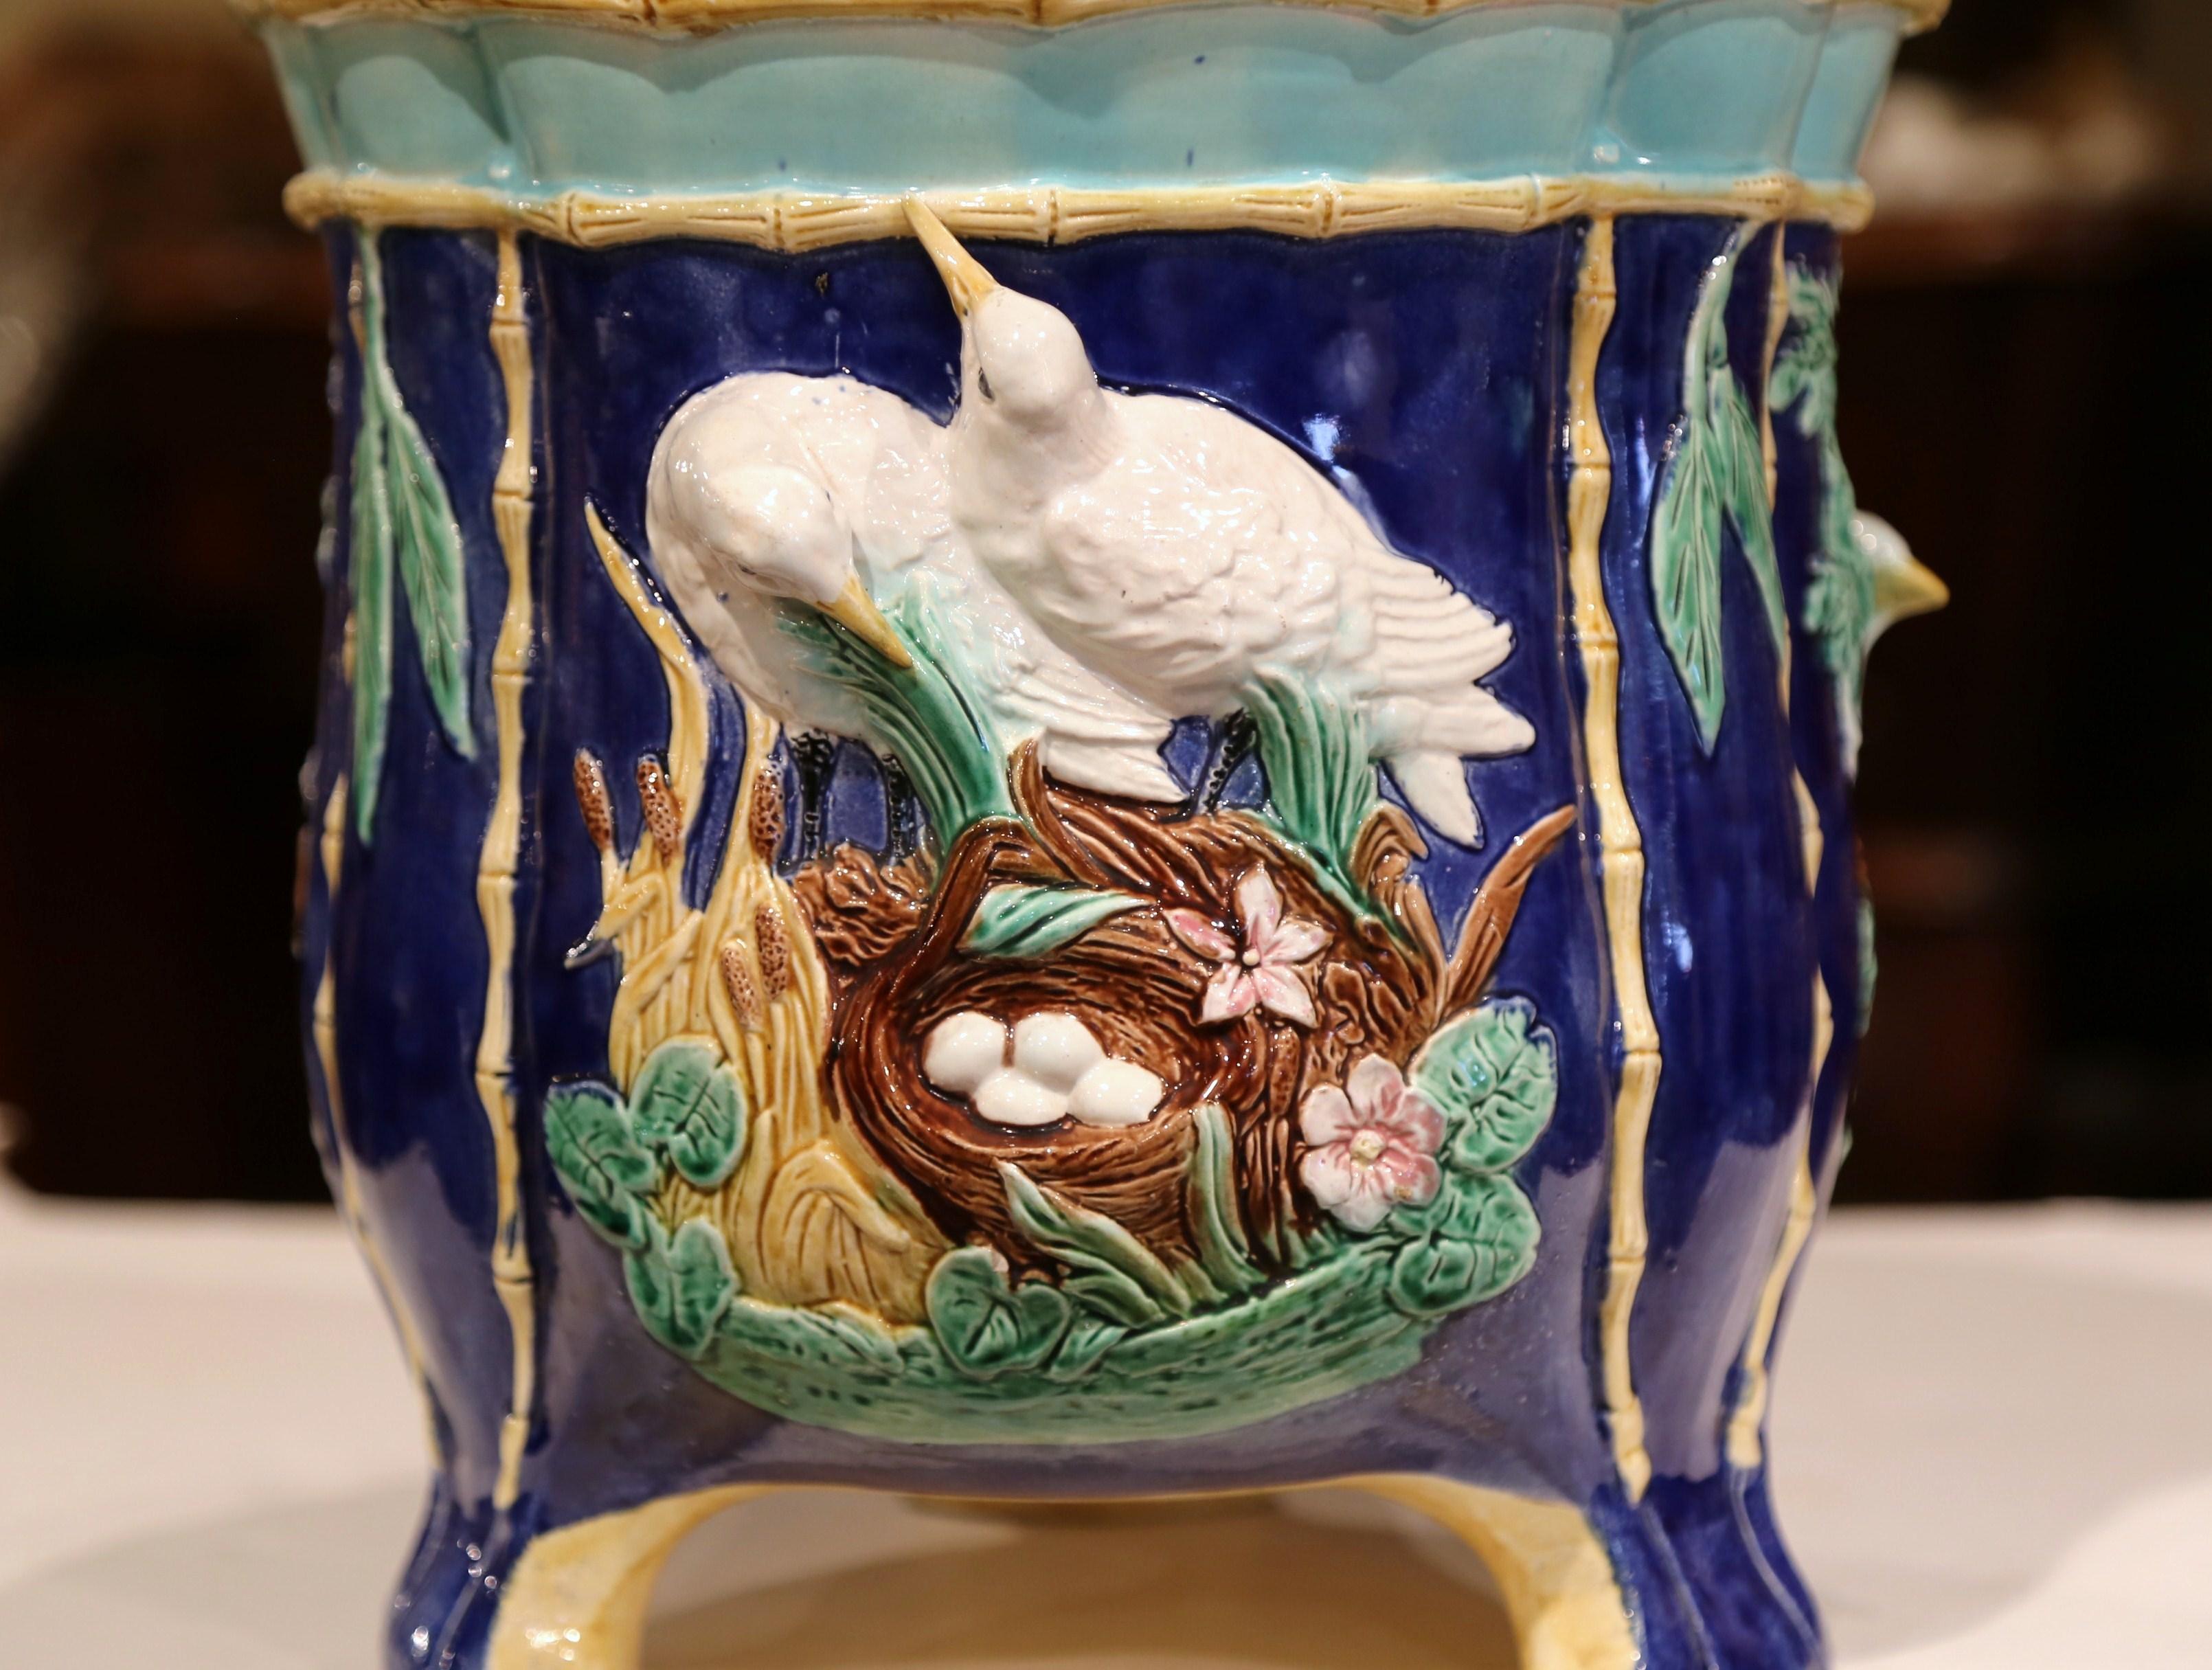 Decorate a tabletop with this colorful, antique Majolica planter. Sculpted in France circa 1870, this round cache pot features bird and foliage decorations in high relief. The porcelain vase has a scalloped edge, a raised base, and faux bamboo